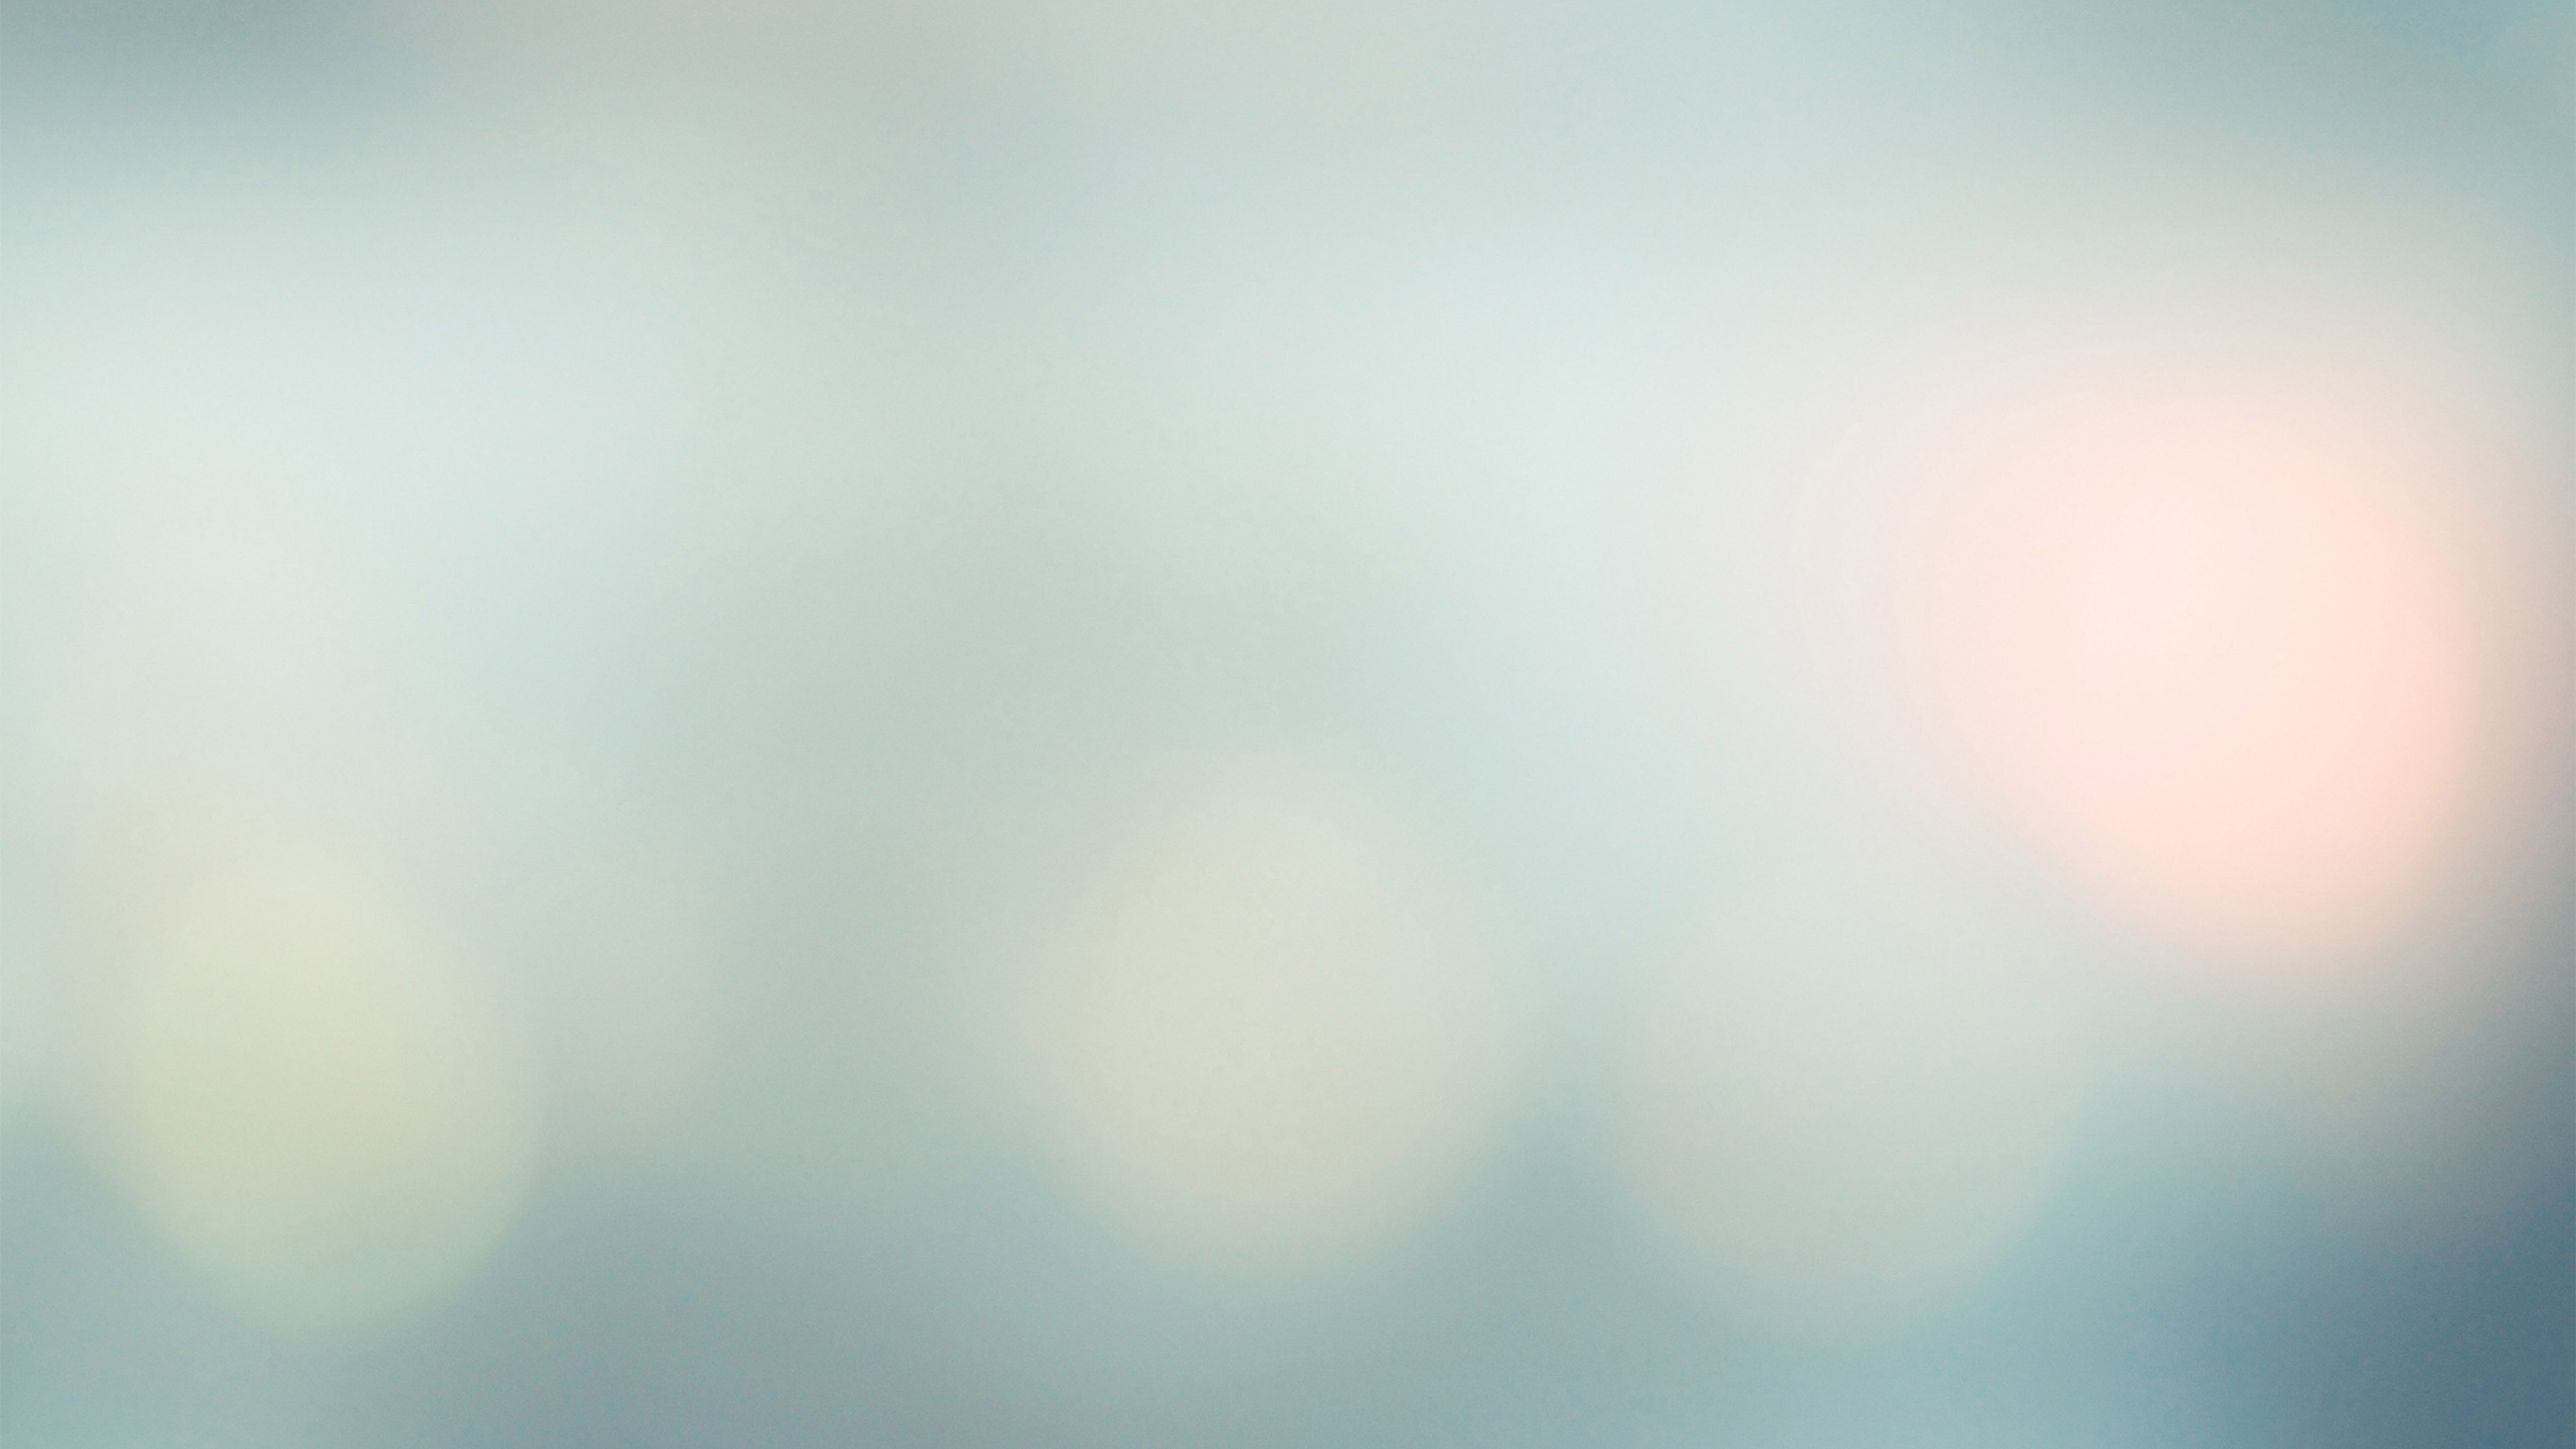 Blur background ·① Download free stunning full HD wallpapers for ...